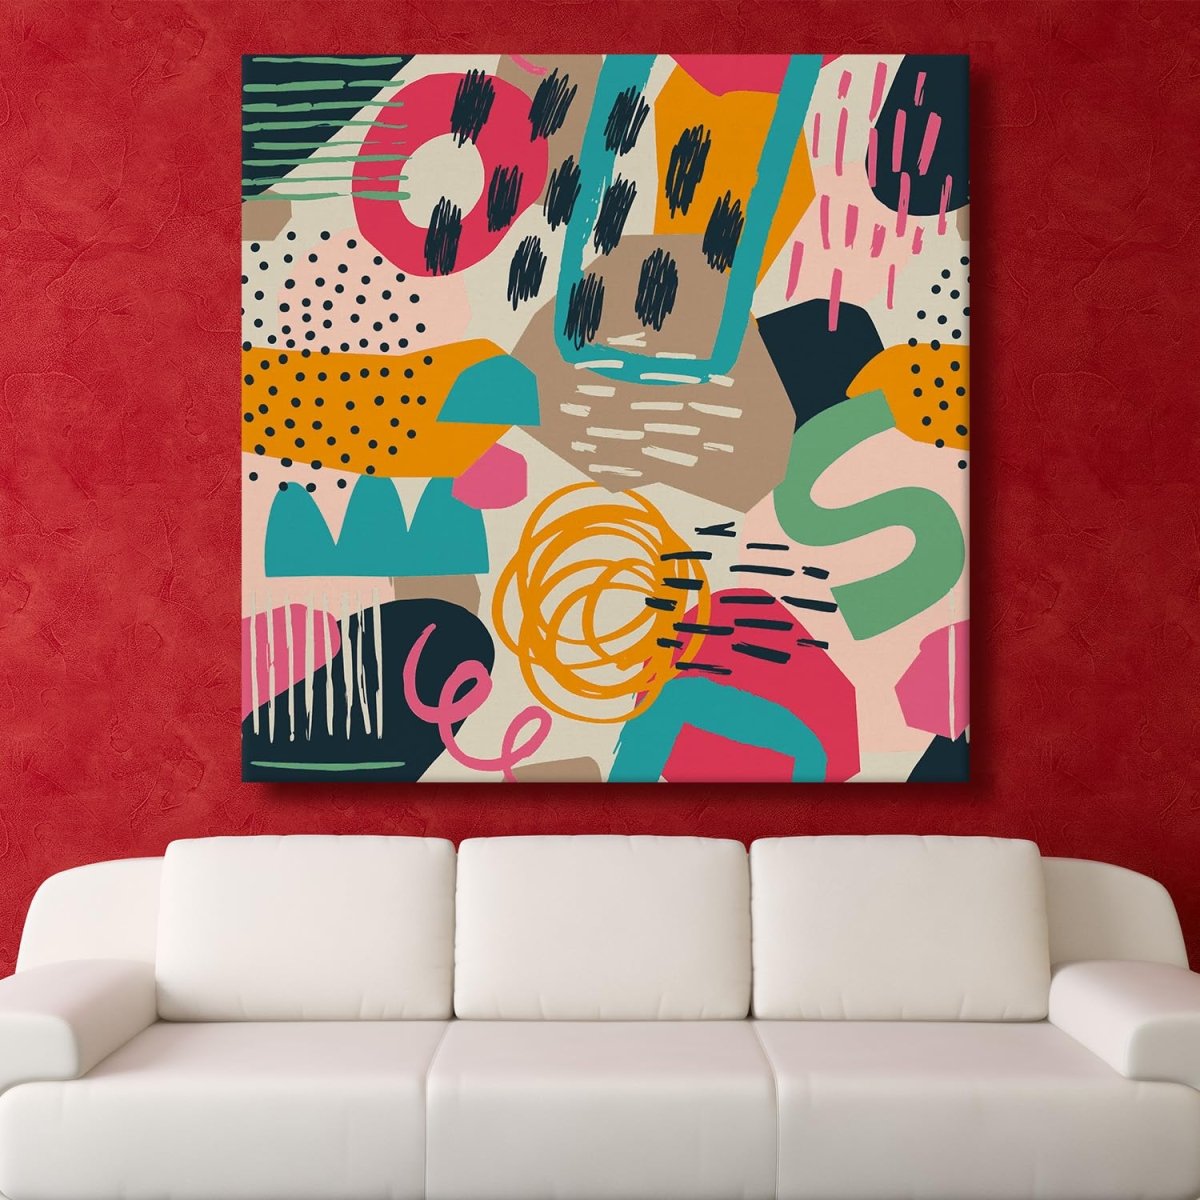 Lively Intersection Canvas Wall Painting (36 x 36 Inches)